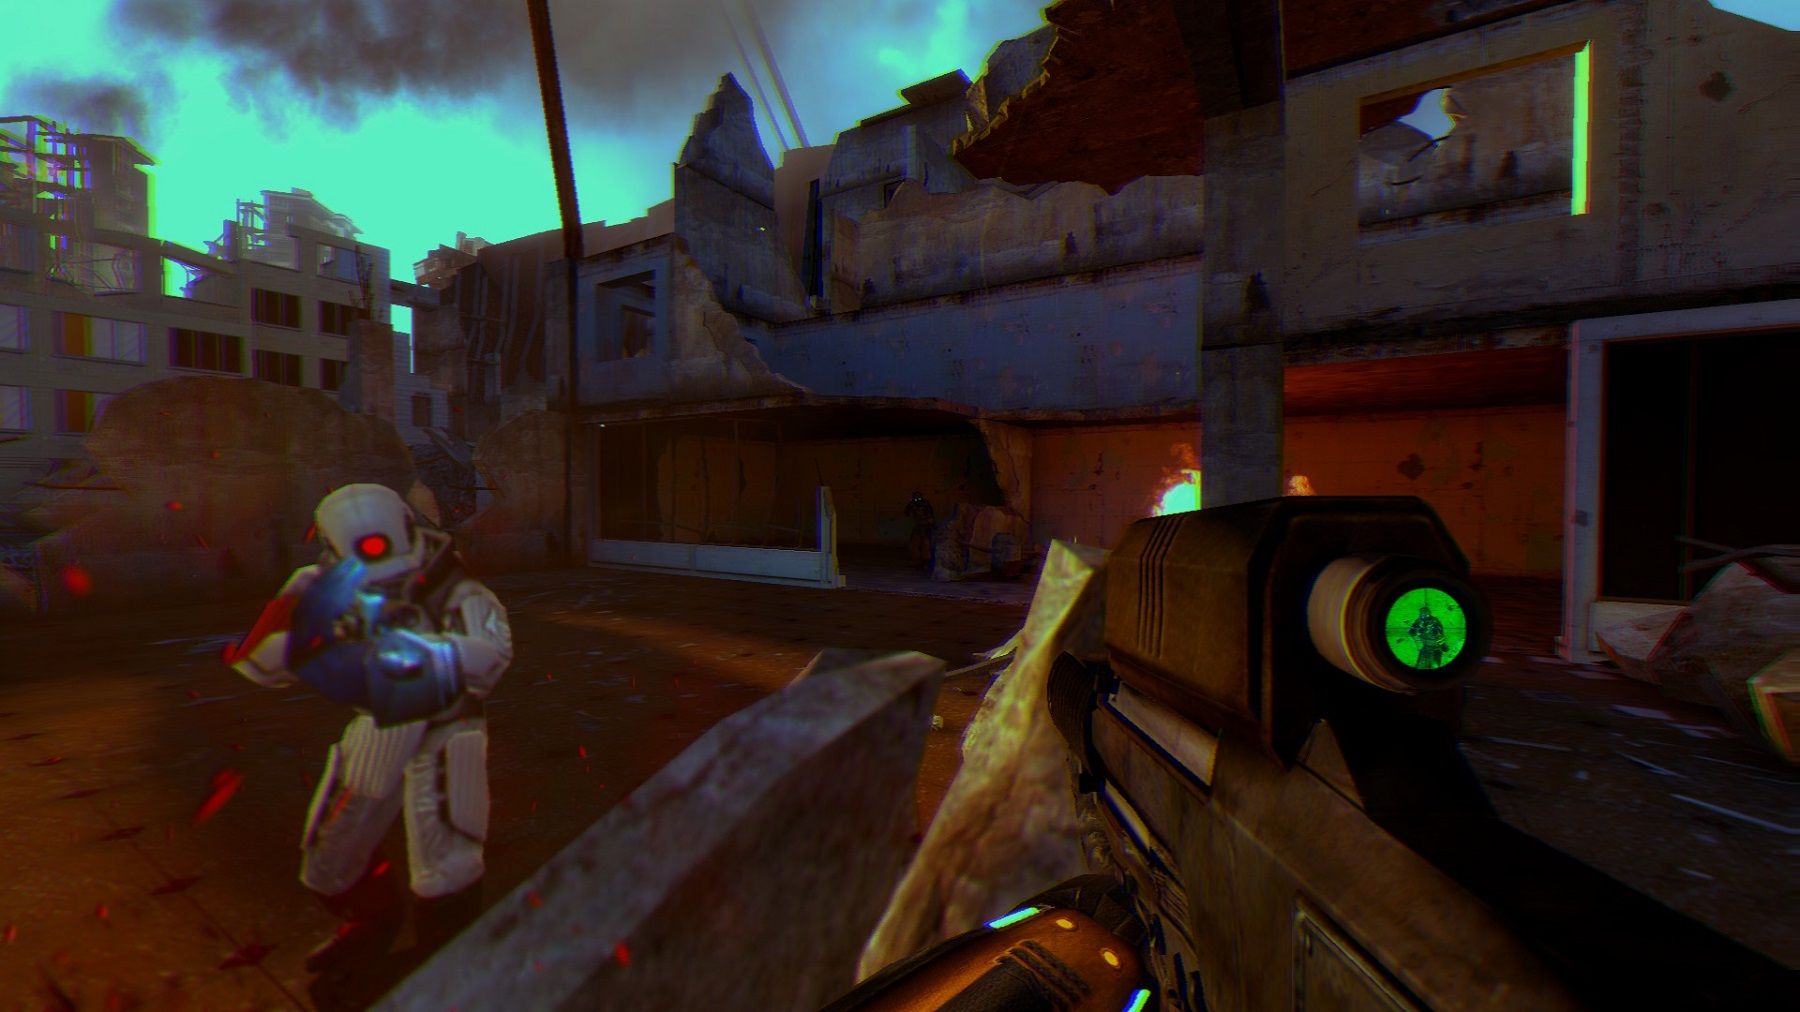 Screenshot from Half-Life 2 showing the player being shot by a combine soldier.